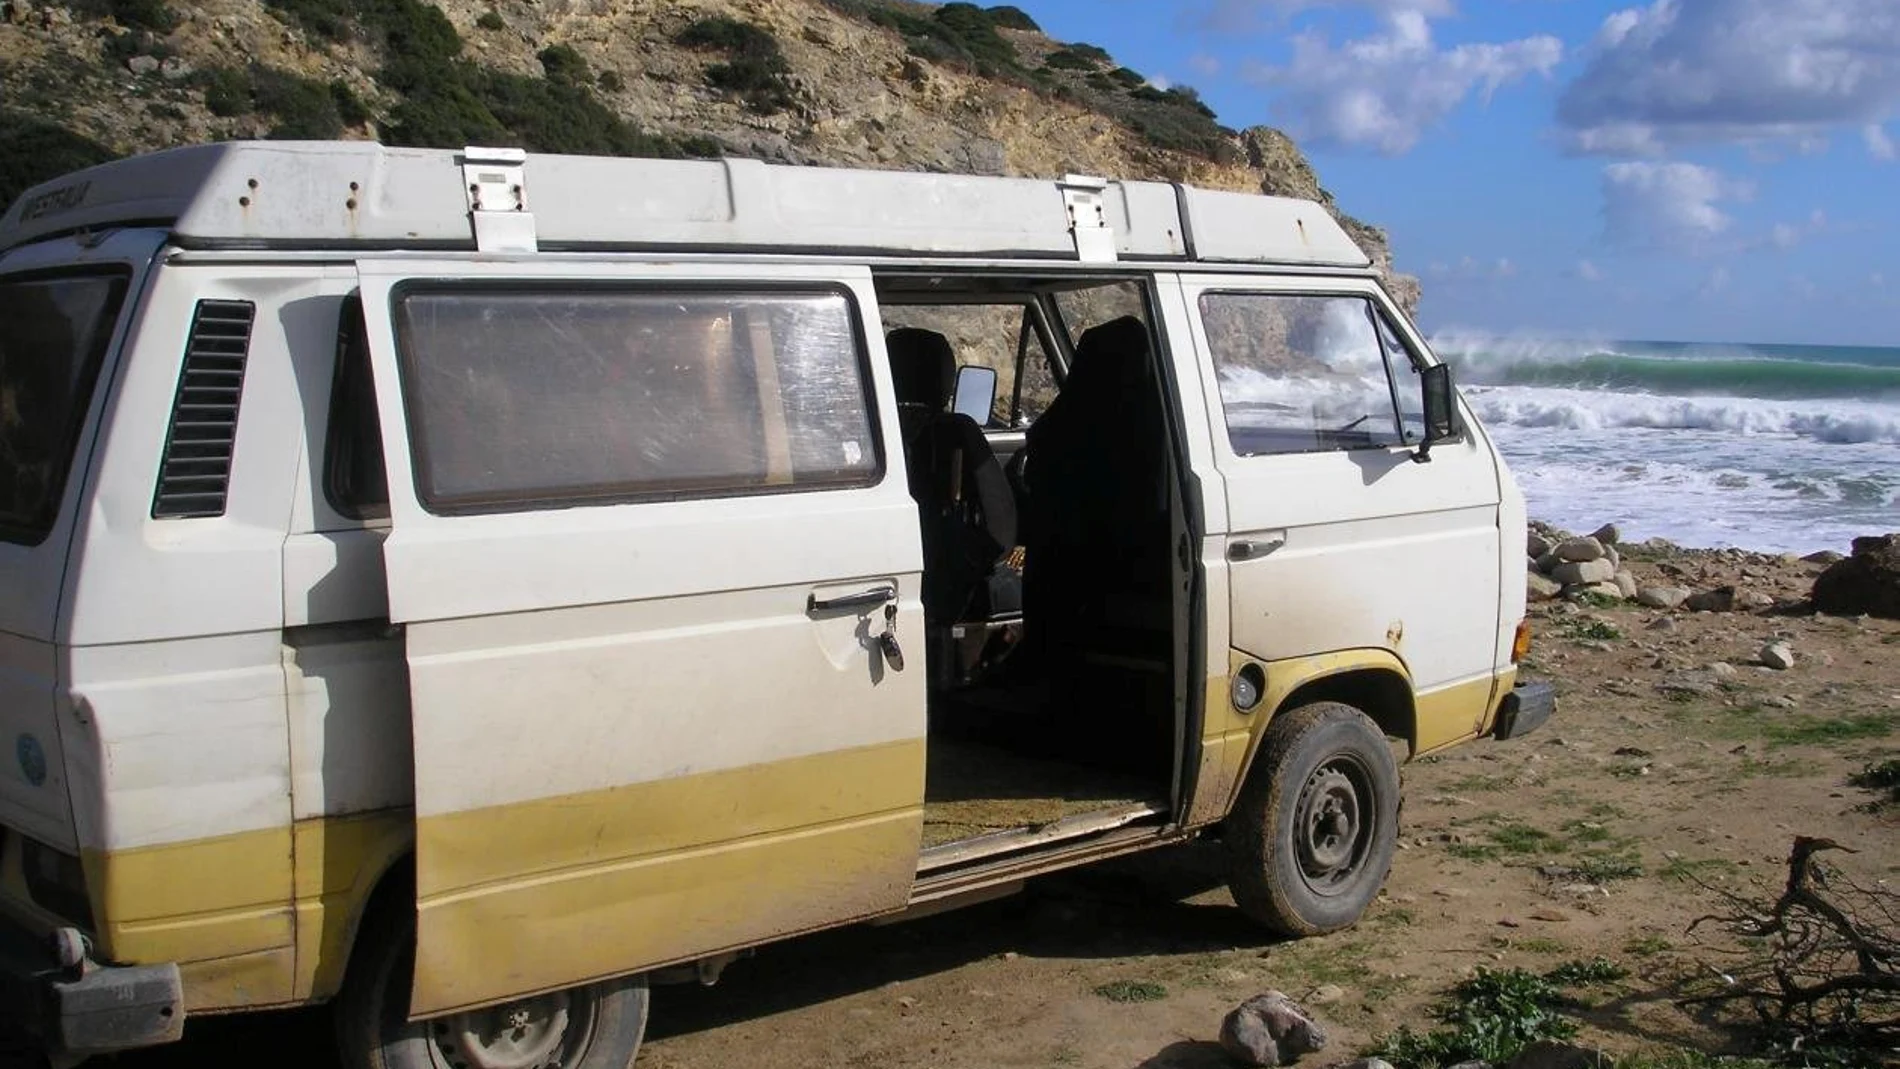 A Volkswagen camper van, used by a suspect who may be connected to the disappearance of the British child Madeleine McCann 13 years ago, is seen in this undated handout image released by the UK Metropolitan Police